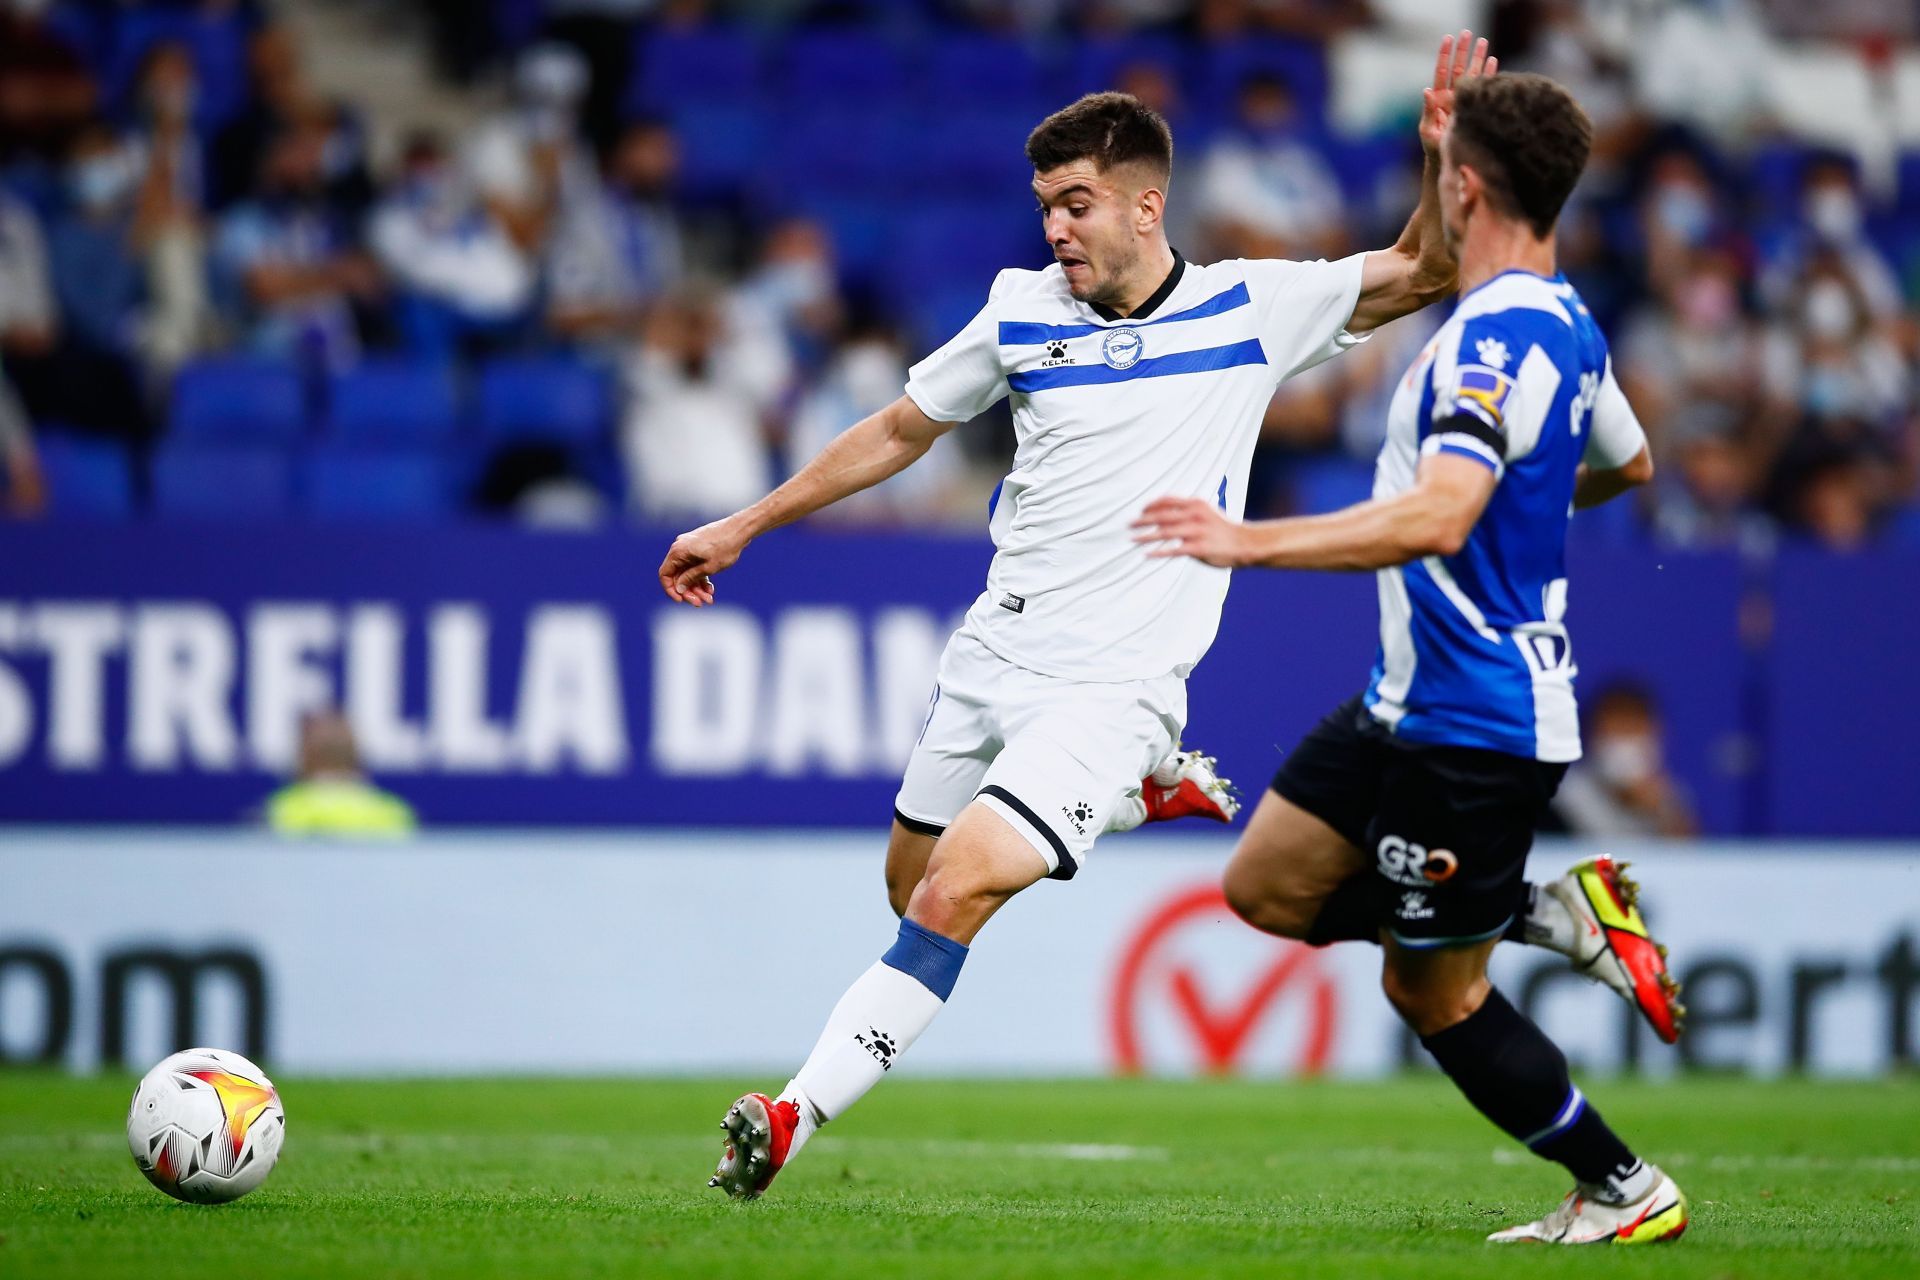 Alaves and Espanyol square off in their La Liga fixture on Wednesday